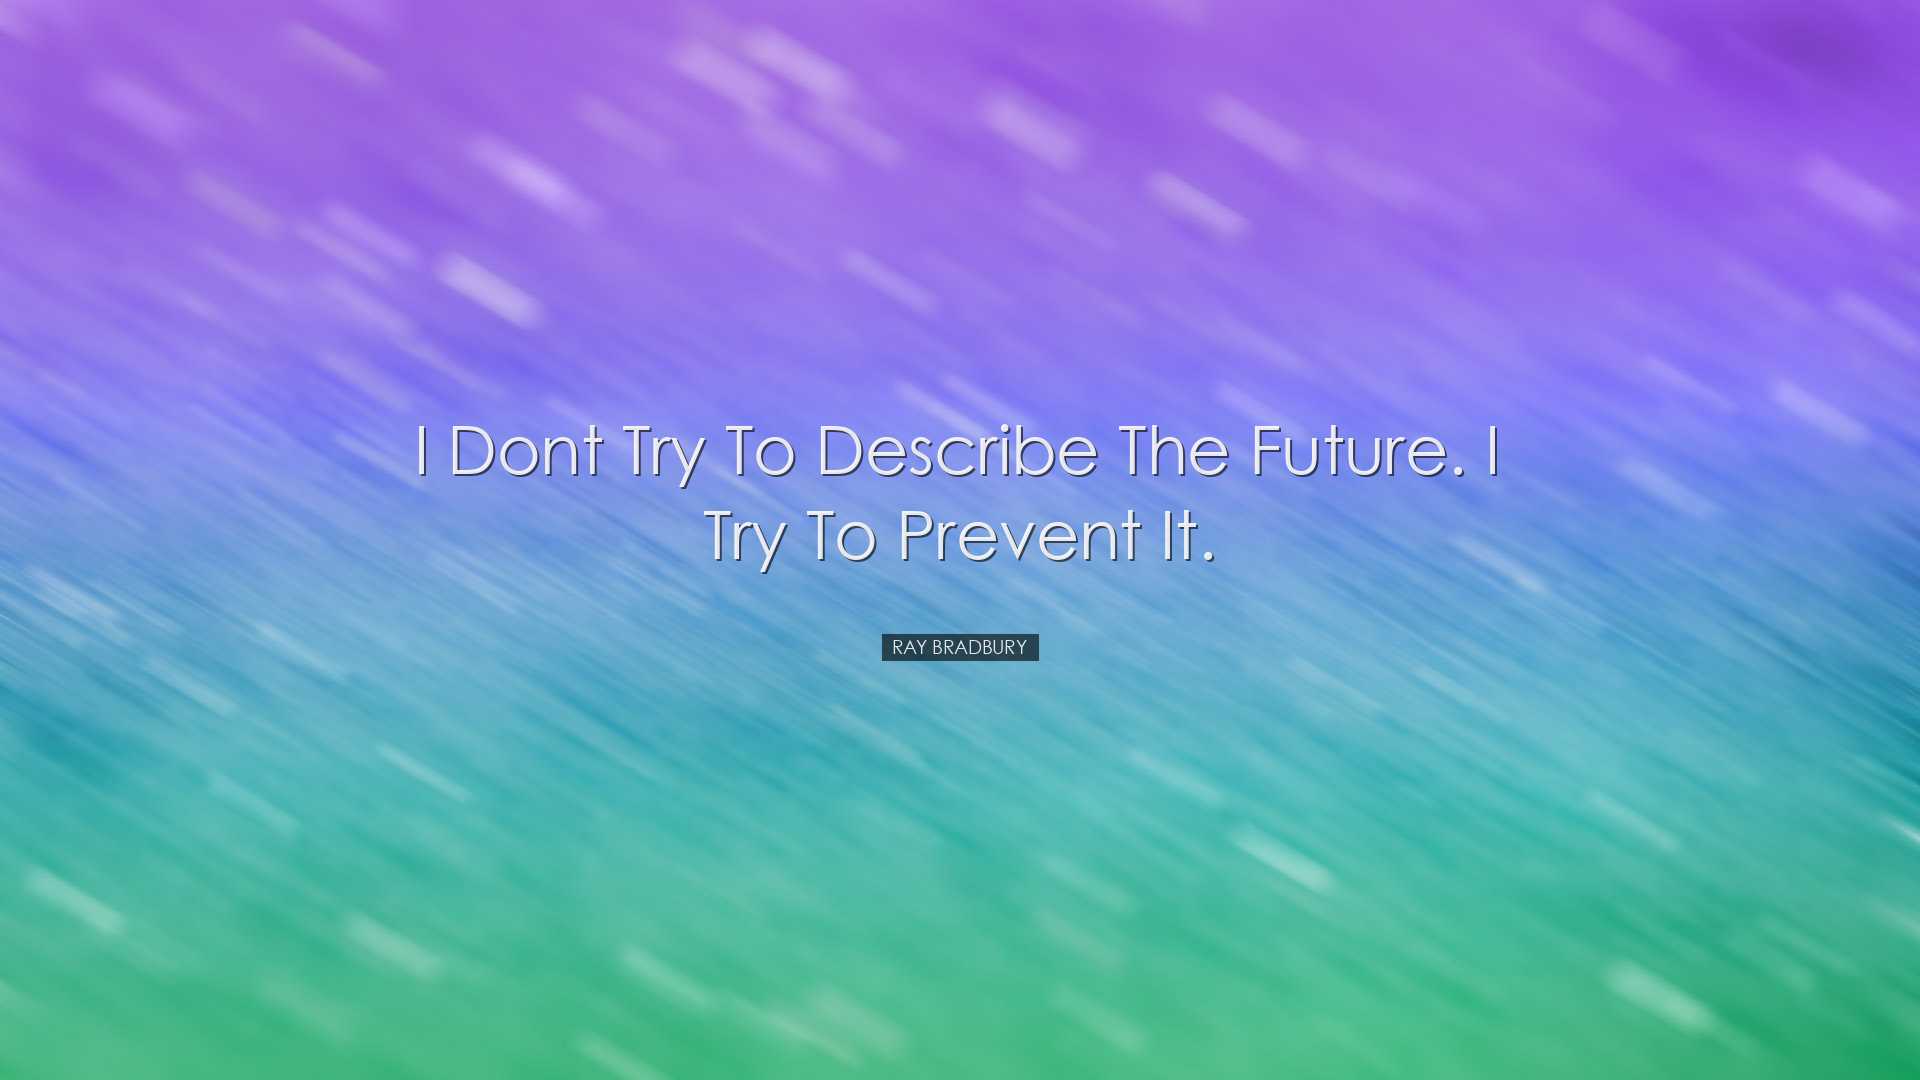 I dont try to describe the future. I try to prevent it. - Ray Brad